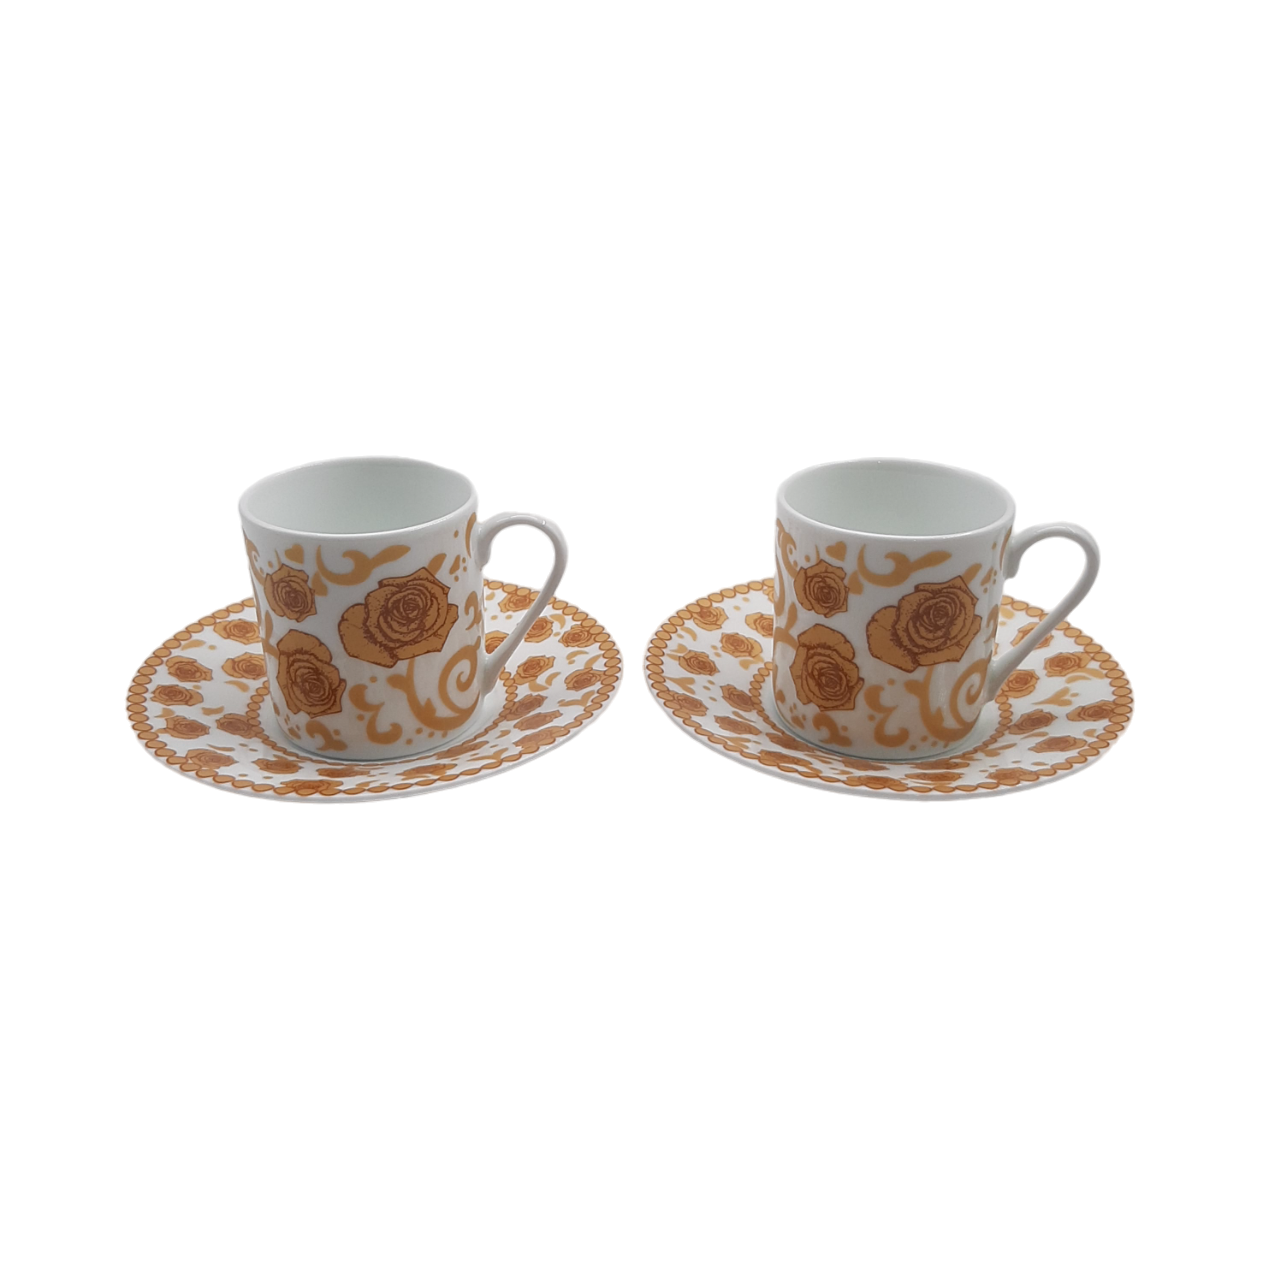 Jenna Clifford Mica Gold Espresso Cup & Saucer Set of 2